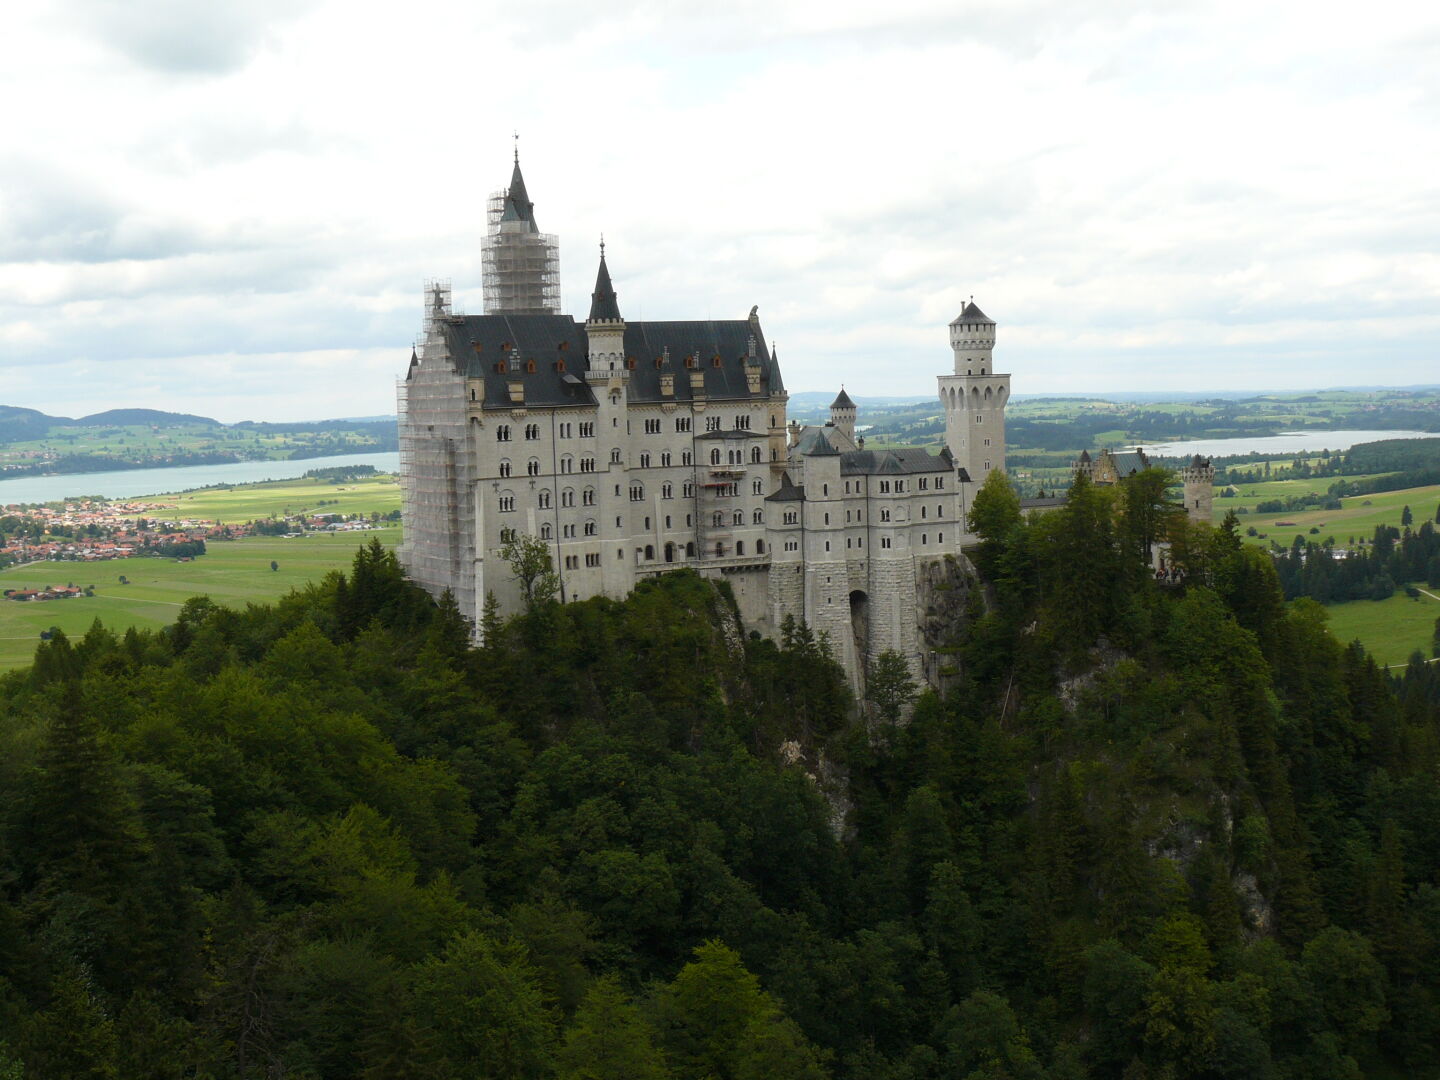 And looking back towards Neuschwanstein while on the path towards the Tegelberg.